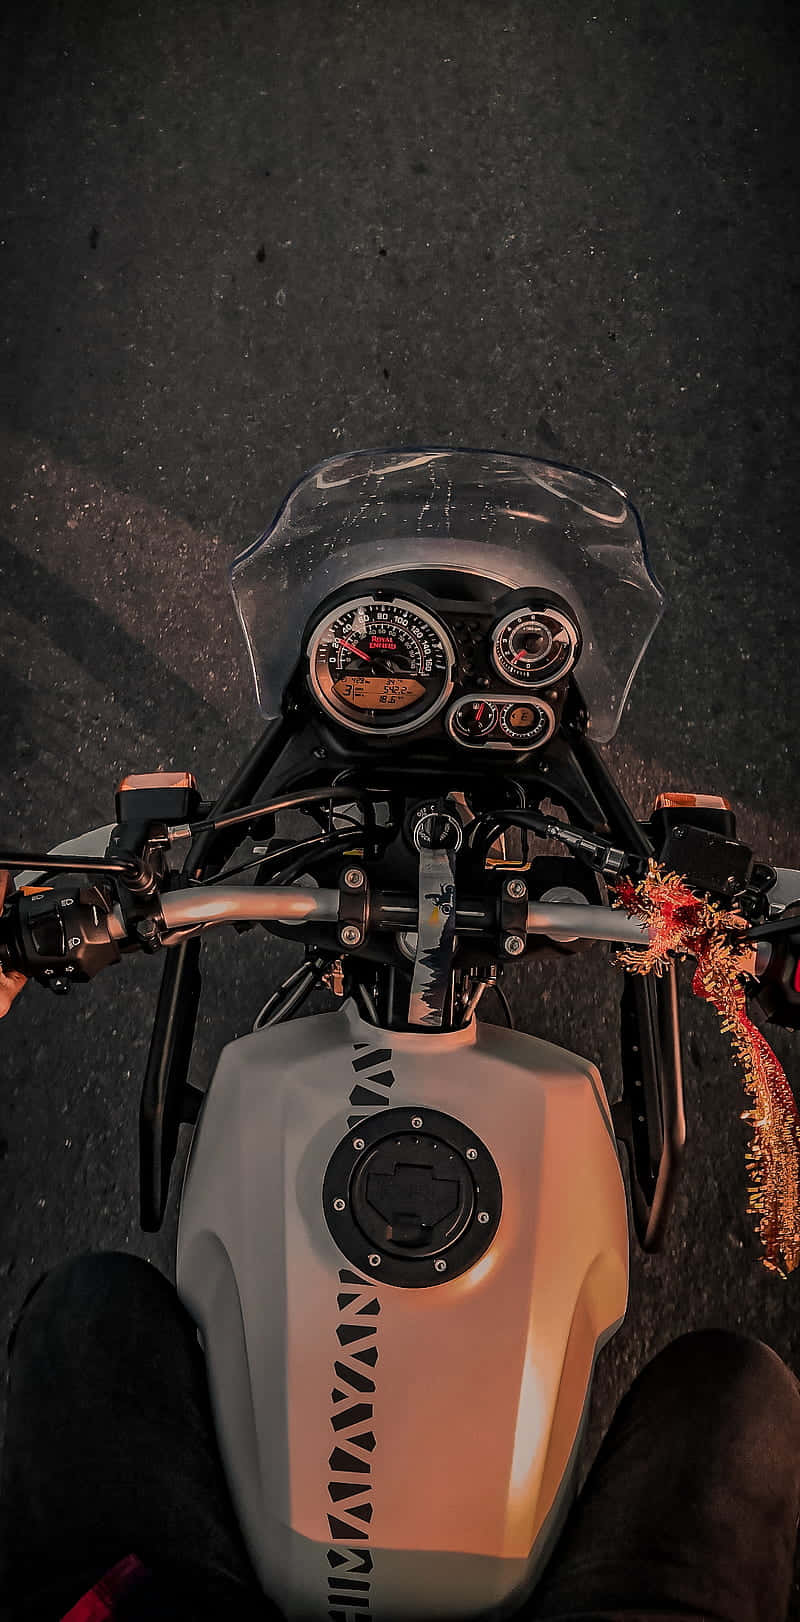 Unlock Your Adventure with the Motorcycle iPhone Wallpaper